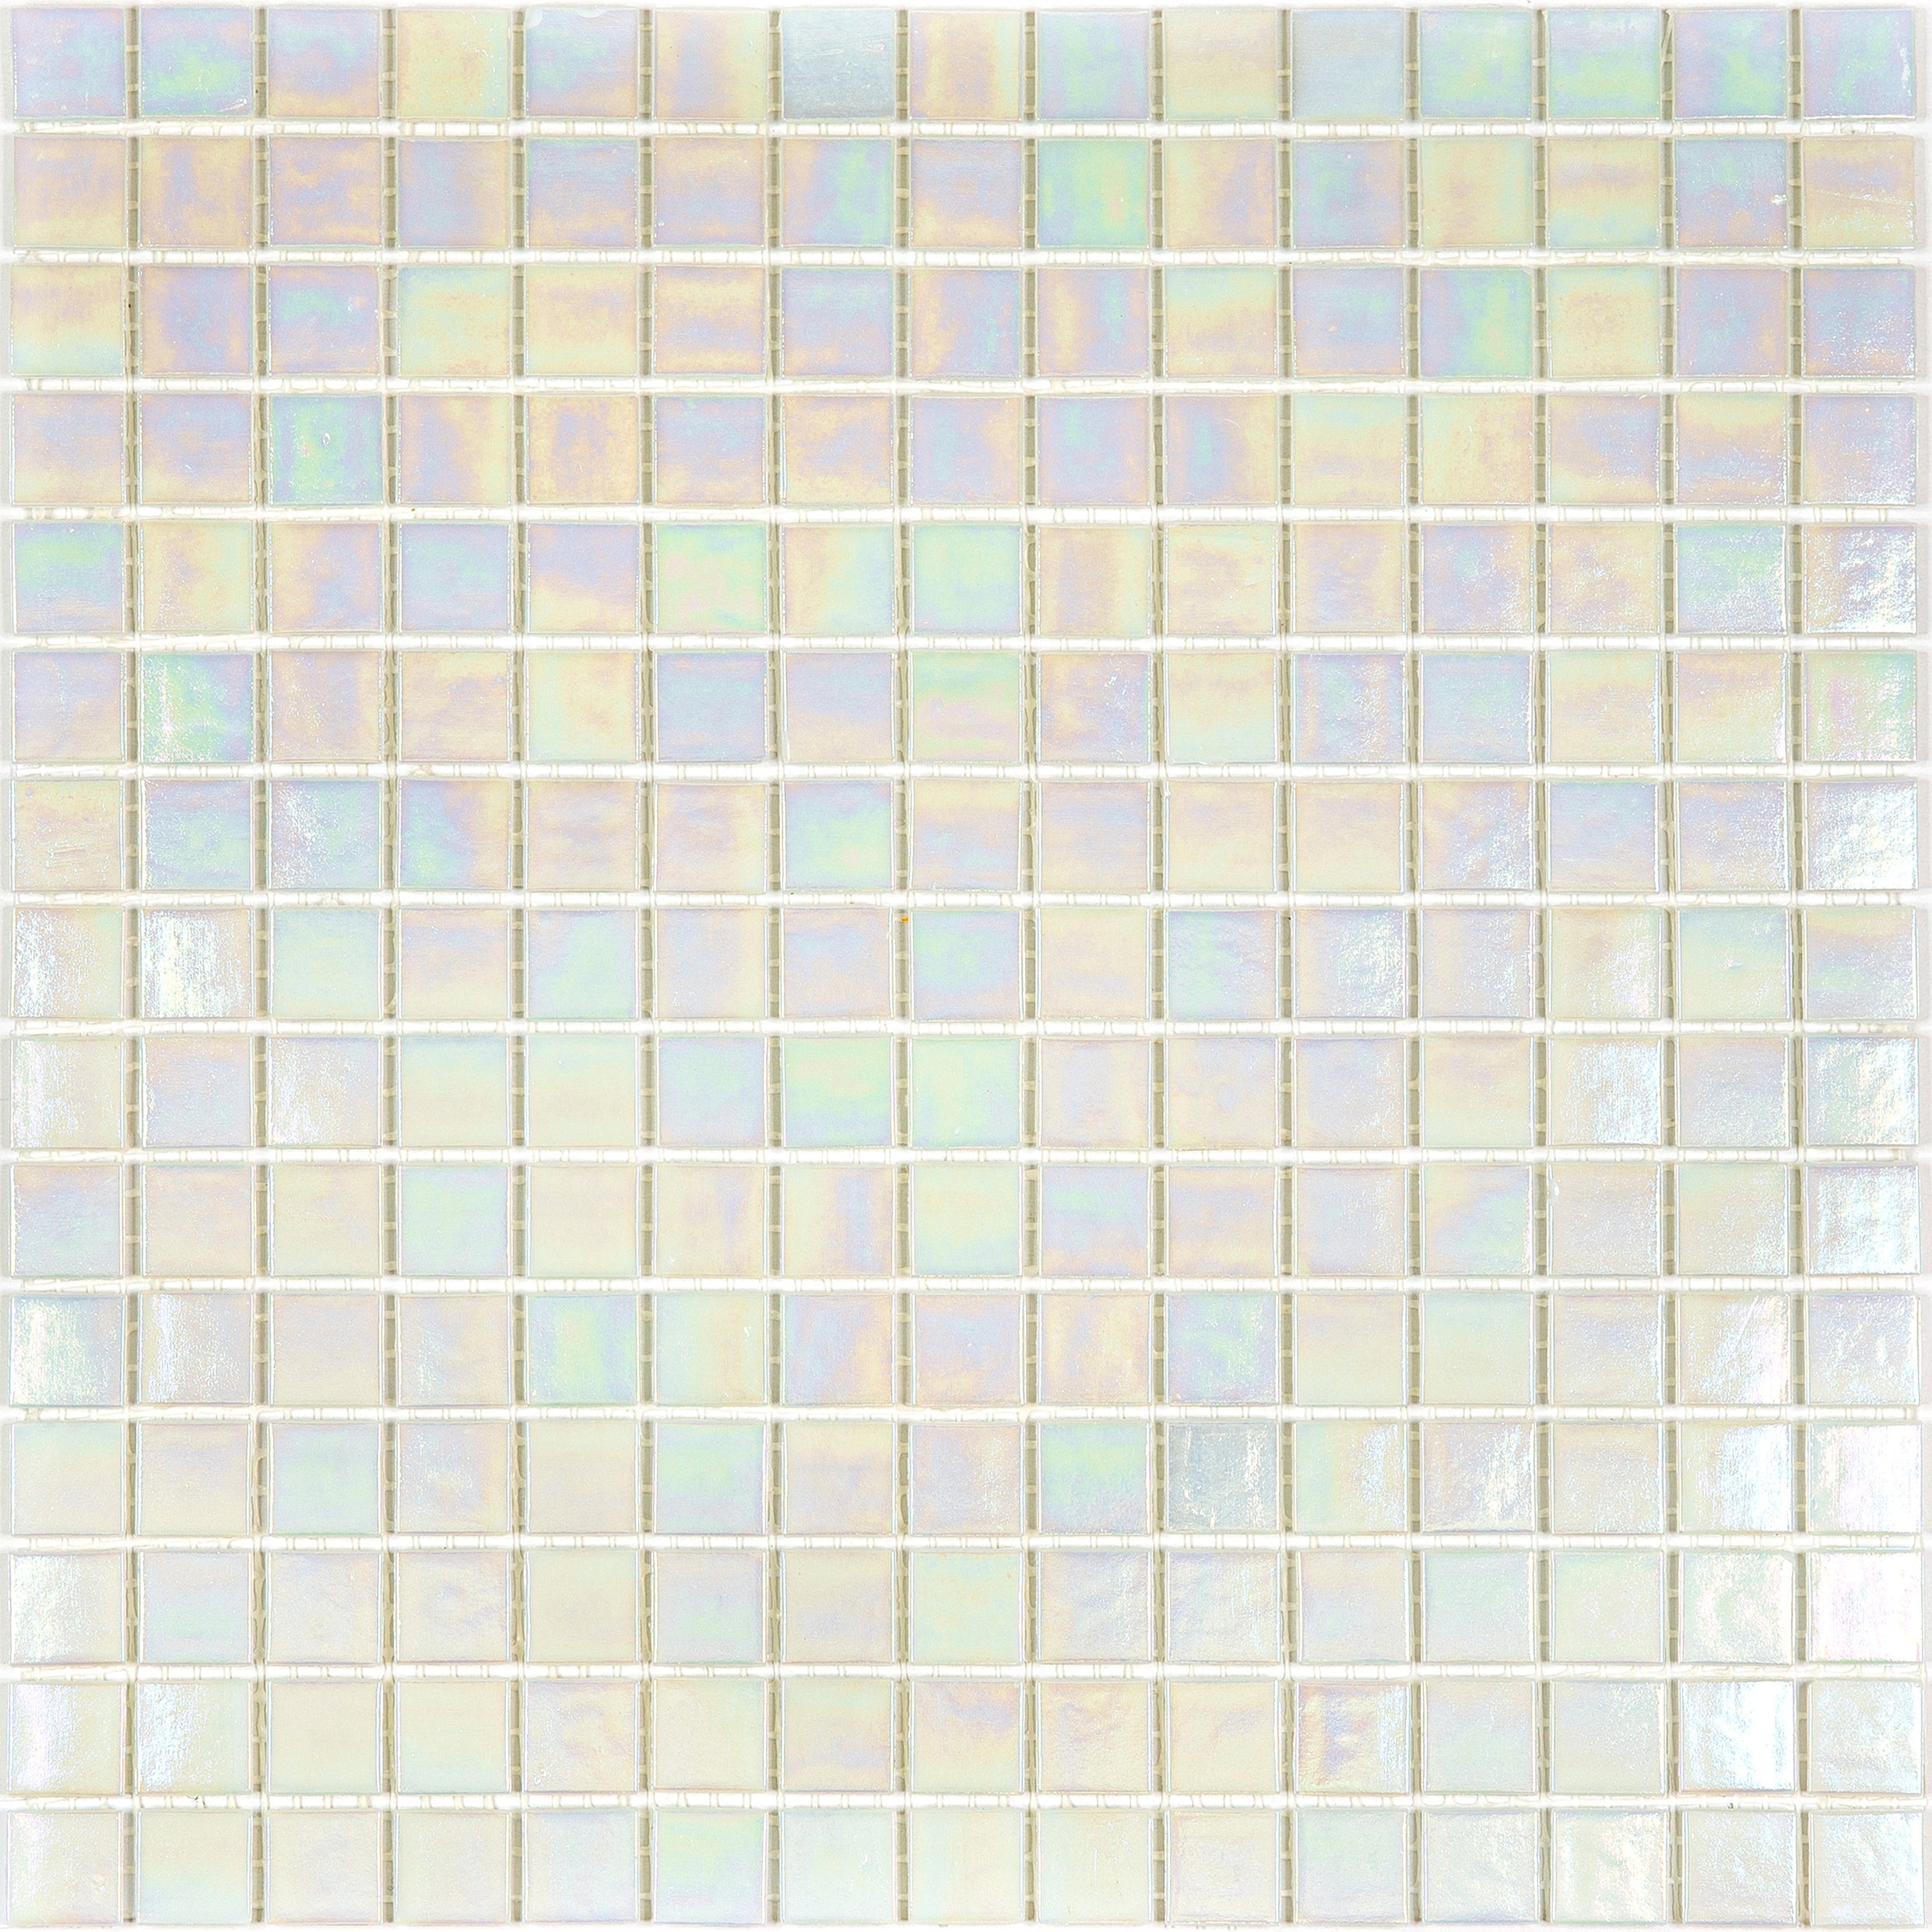 mir alma solid colors 0_8 inch pearly pb01 wall and floor mosaic distributed by surface group natural materials